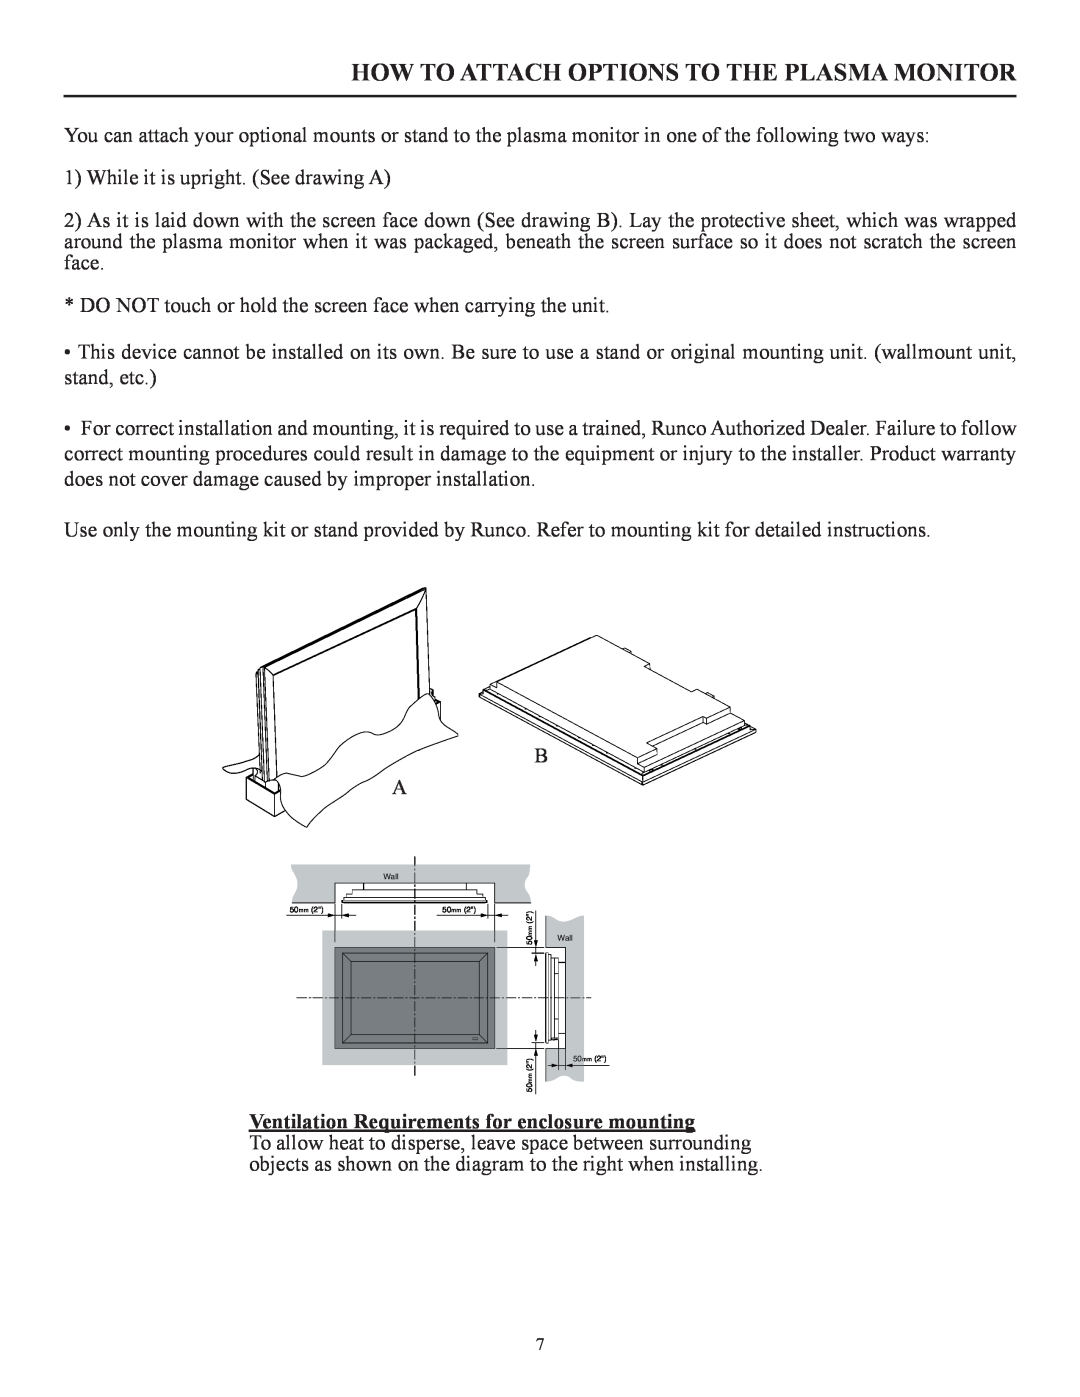 Runco CW-42i manual How To Attach Options To The Plasma Monitor, Ventilation Requirements for enclosure mounting 